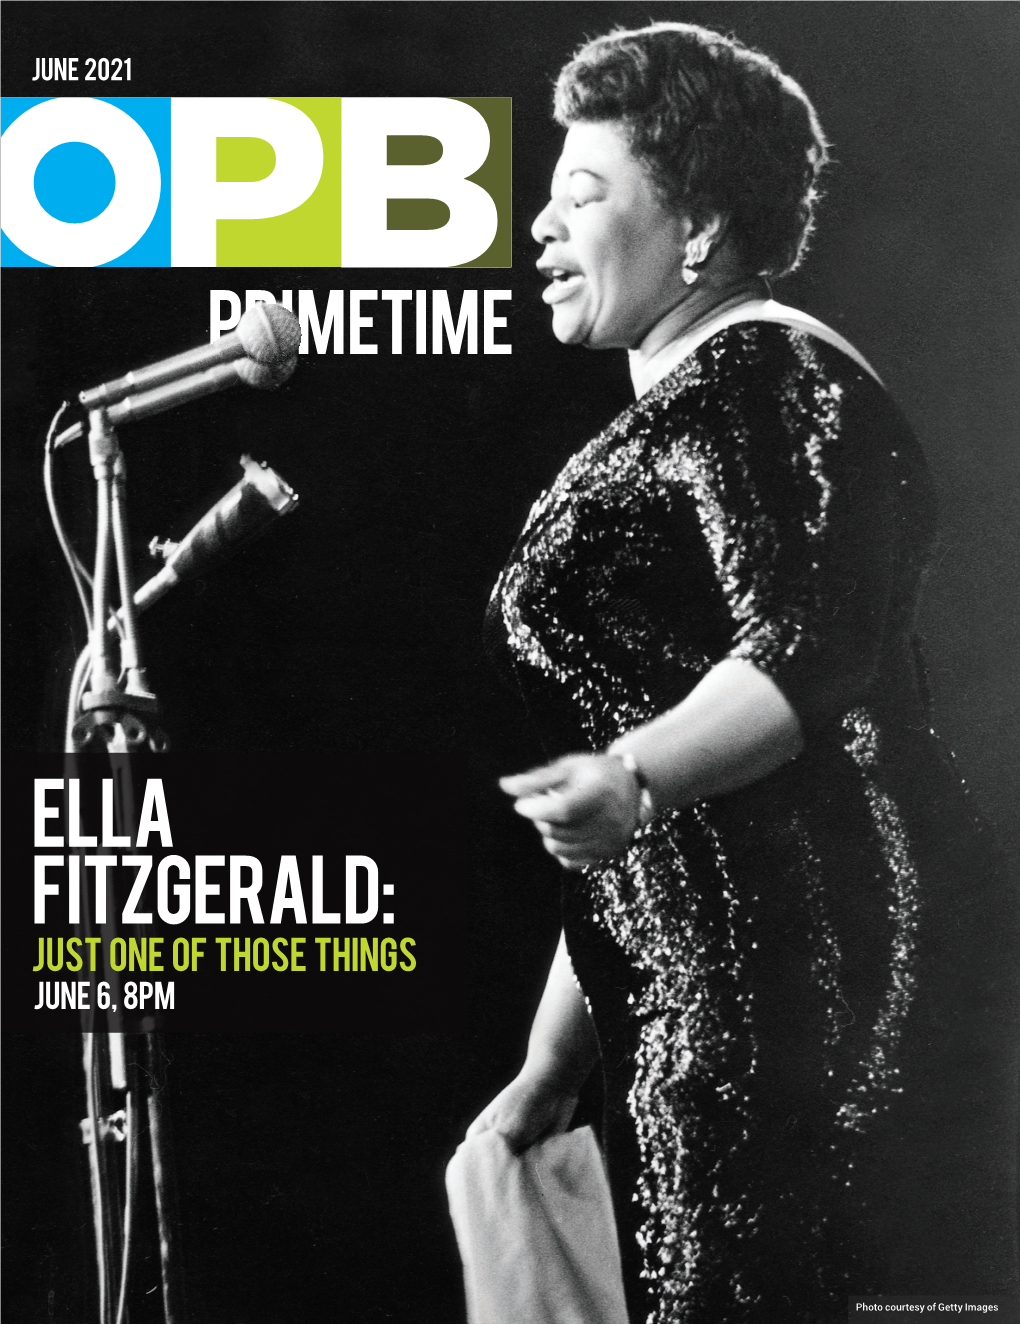 Ella Fitzgerald: Just One of Those Things June 6, 8Pm